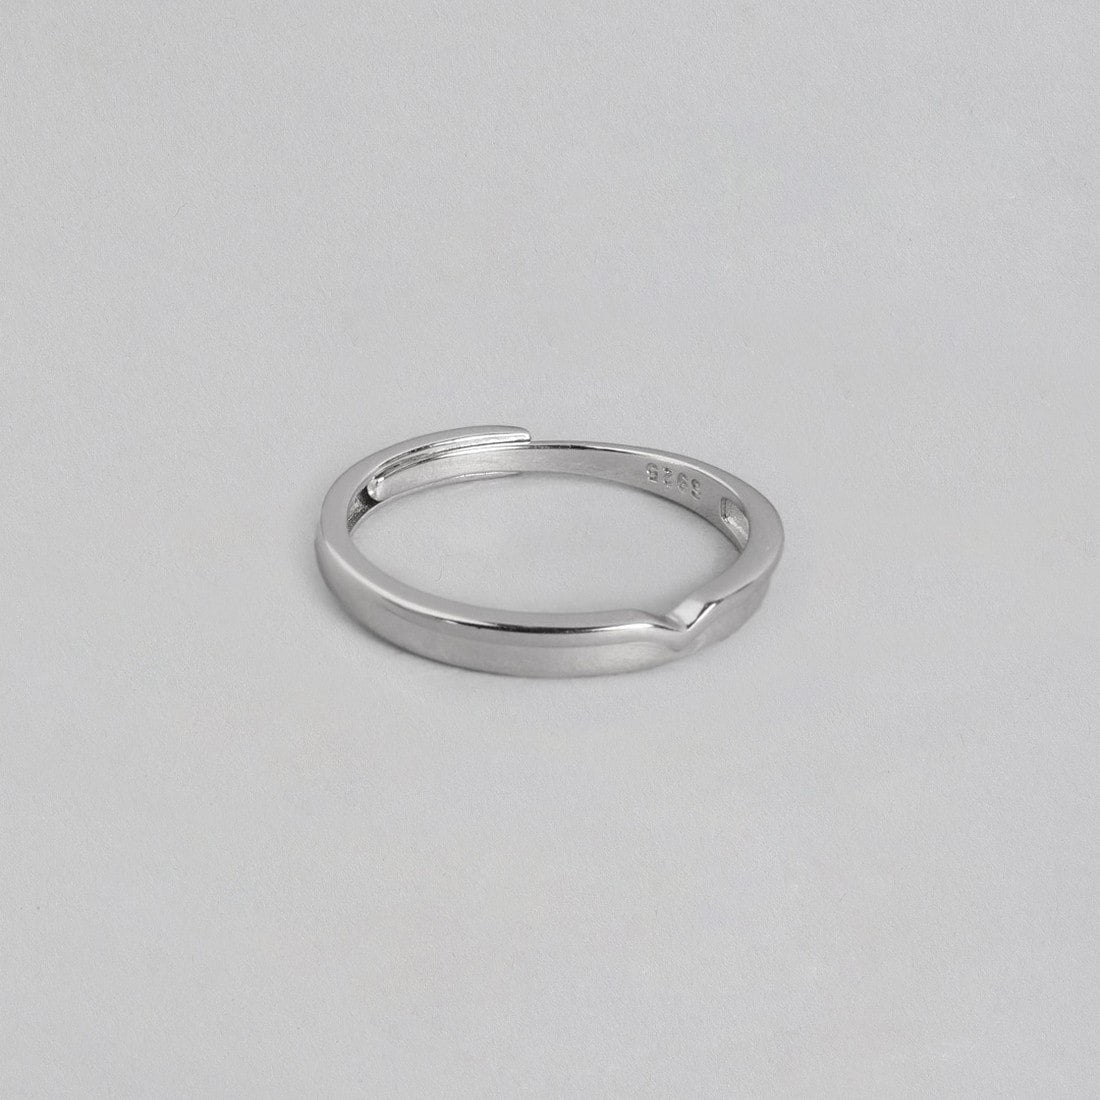 Minimalistic Rhodium Plated 925 Sterling Silver Ring for Him (Adjustable)